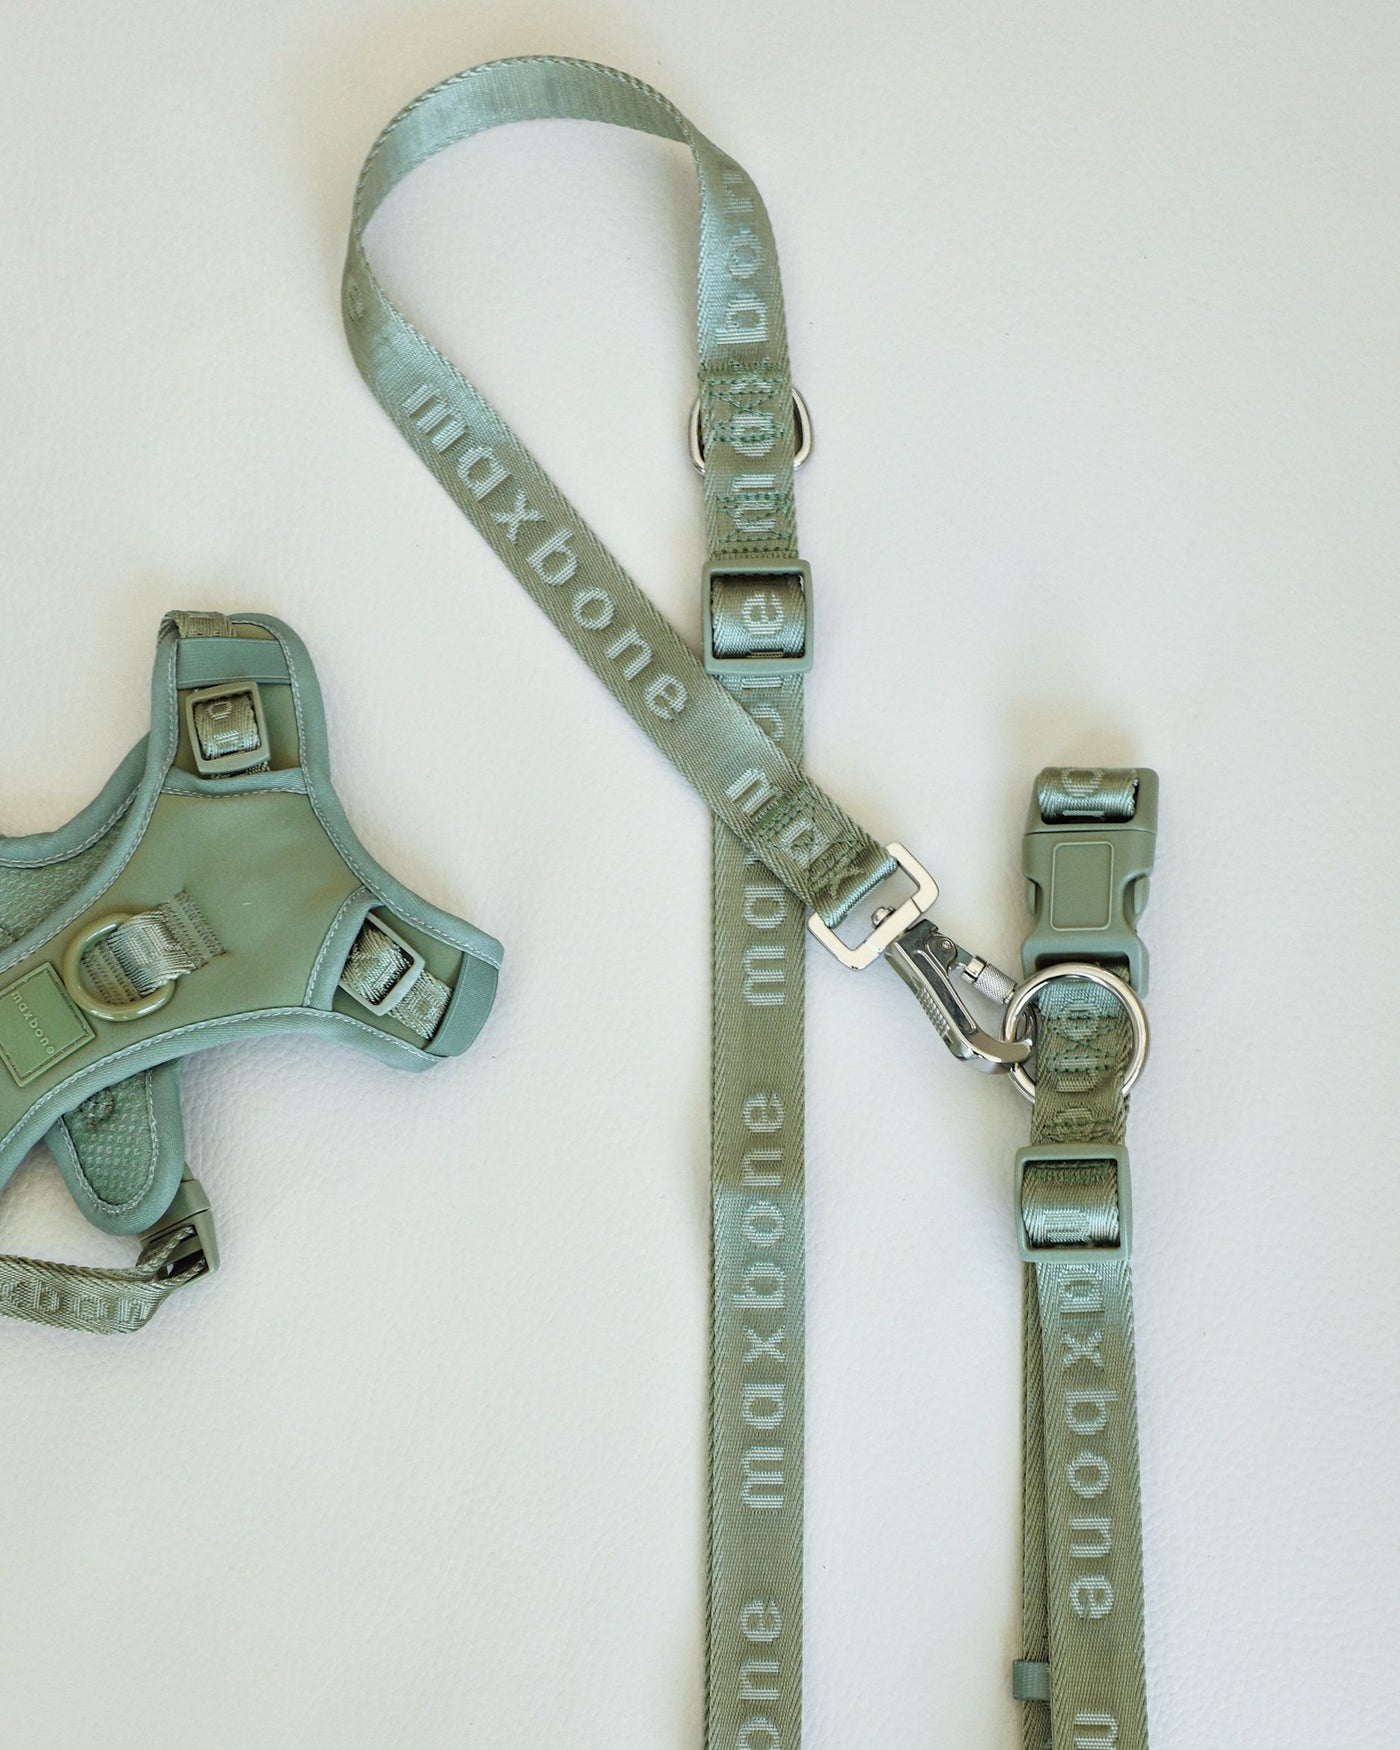 sage green nylon dog leash by maxbone with silver metal hardware and coordinate sage green plastic buckle